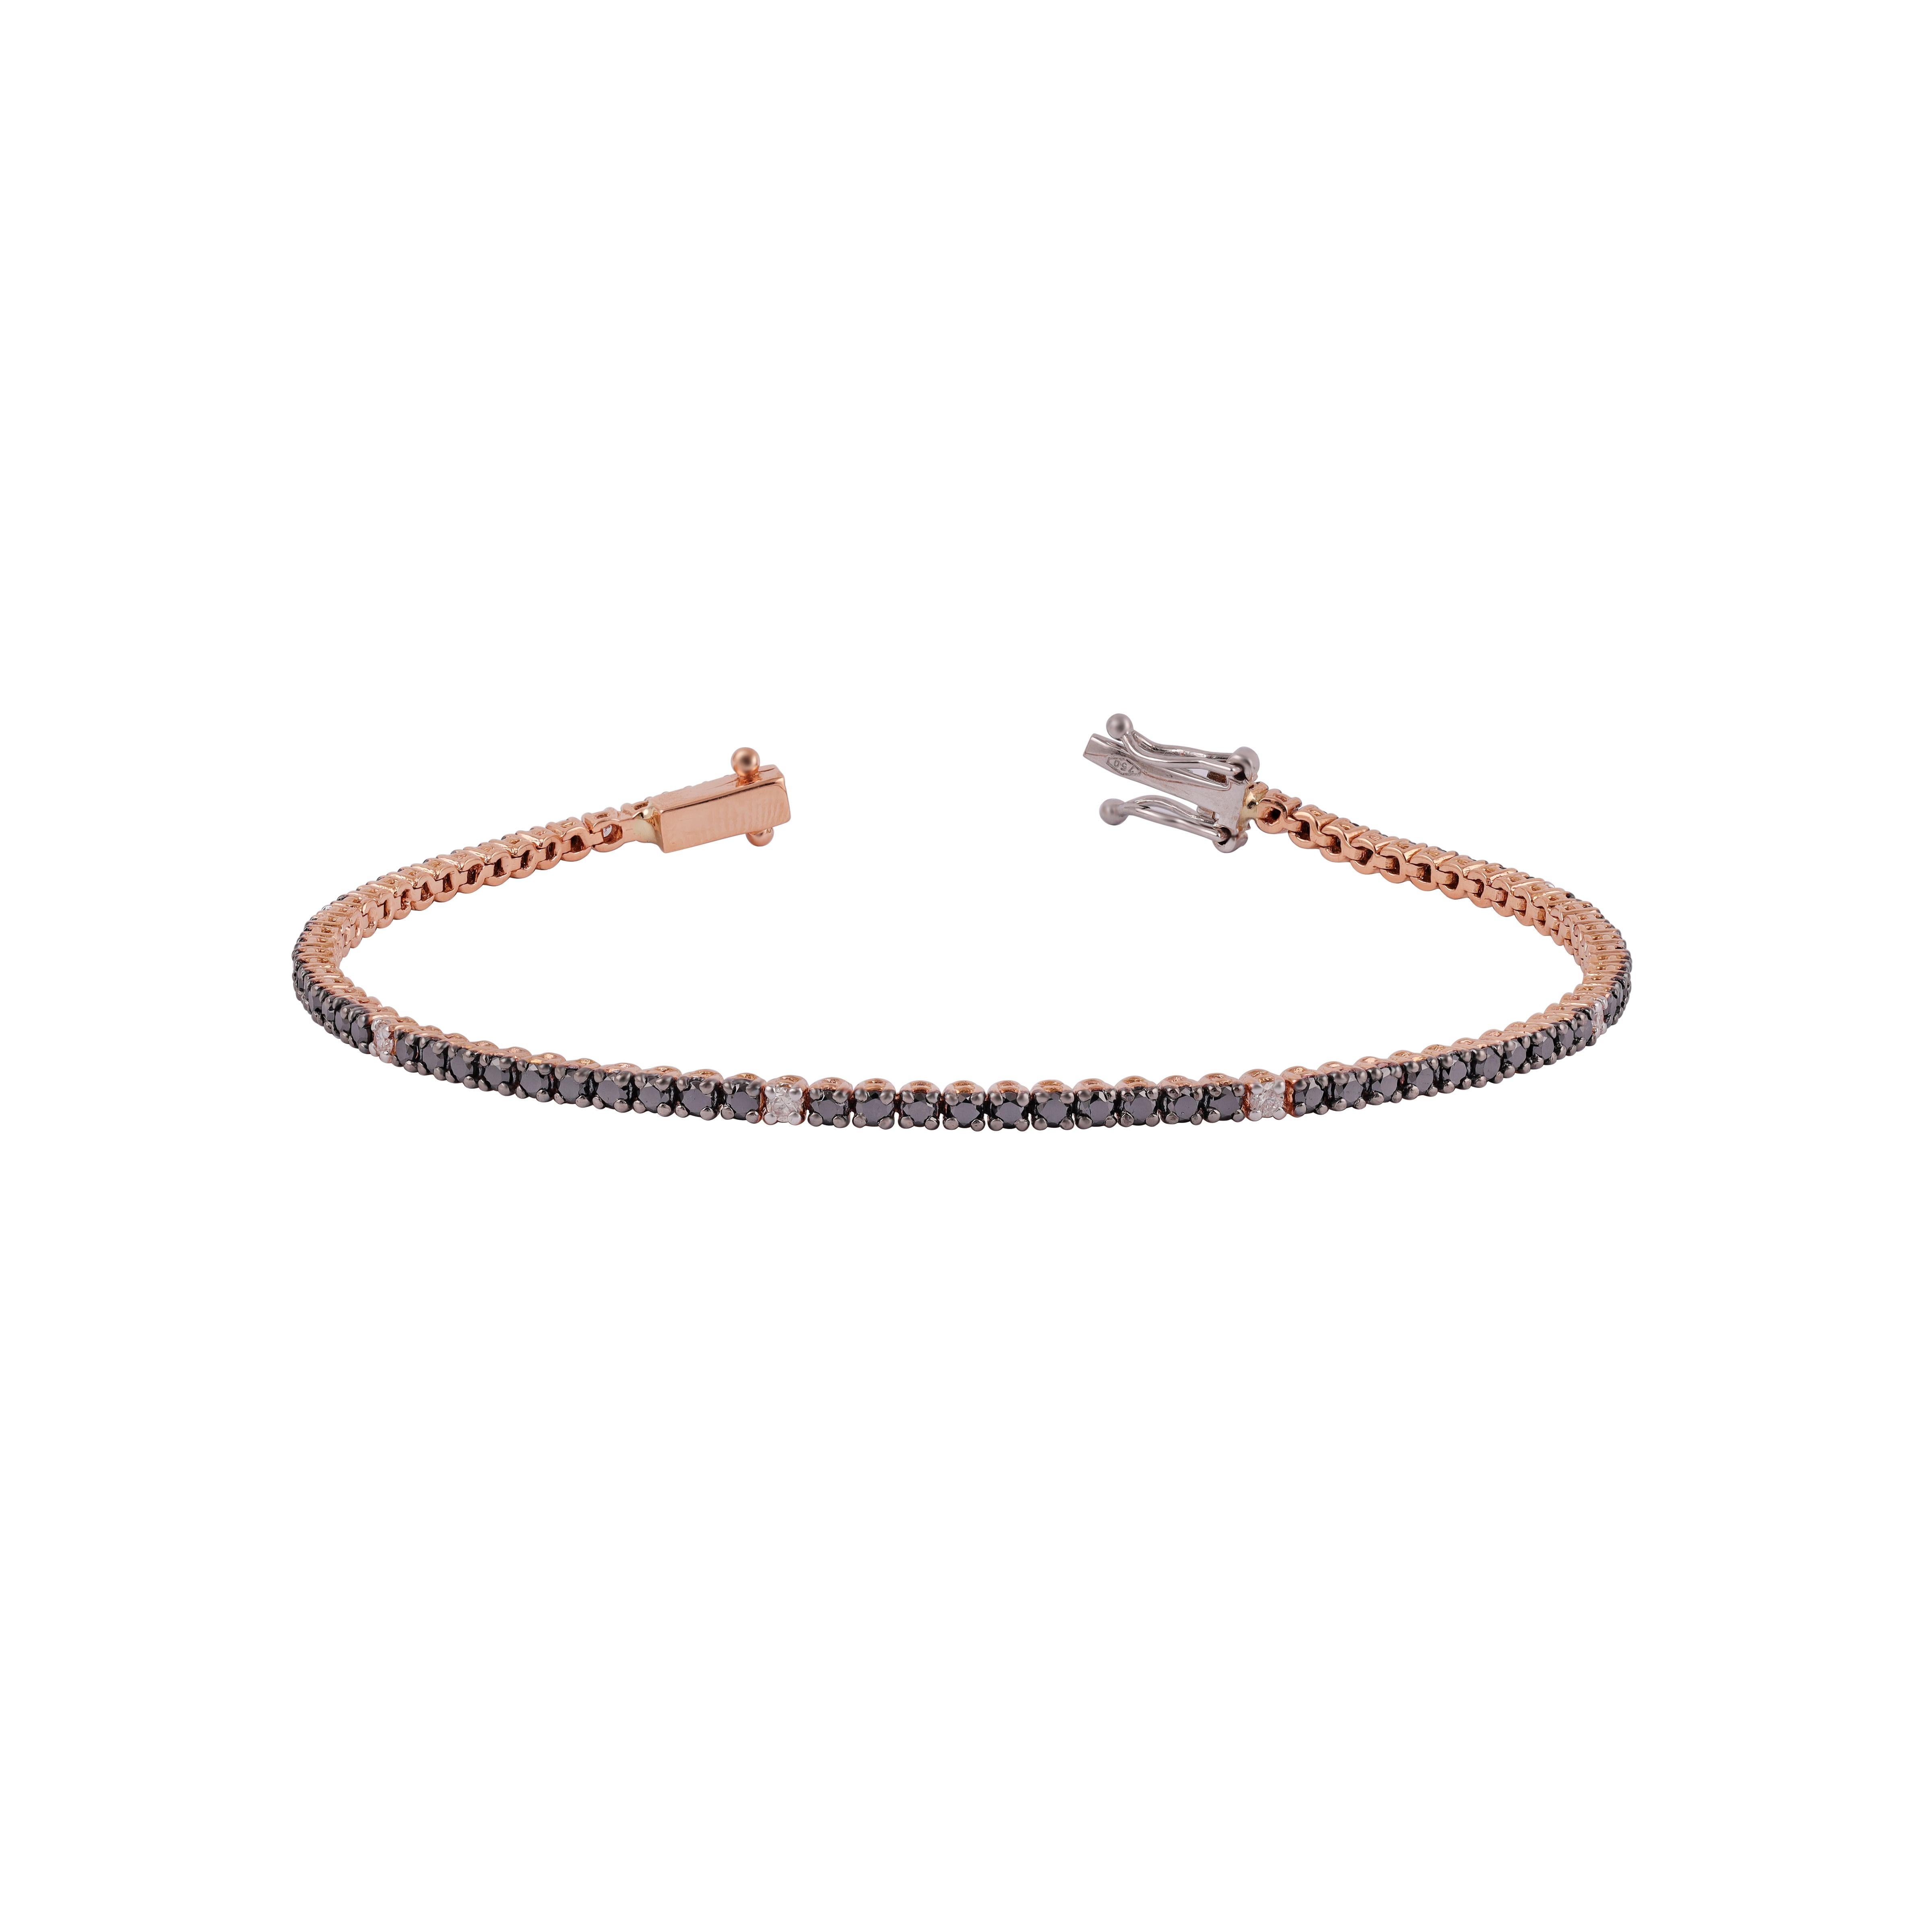 This 1.97 Carat Unisex Black Diamond Tennis Bracelet, is a stunning statement on either sex's wrist.

Set in 18Kt Rose Gold it stylishly dresses up day and night wear.

Timelessly beautiful it is also water proof and so never needs to be taken